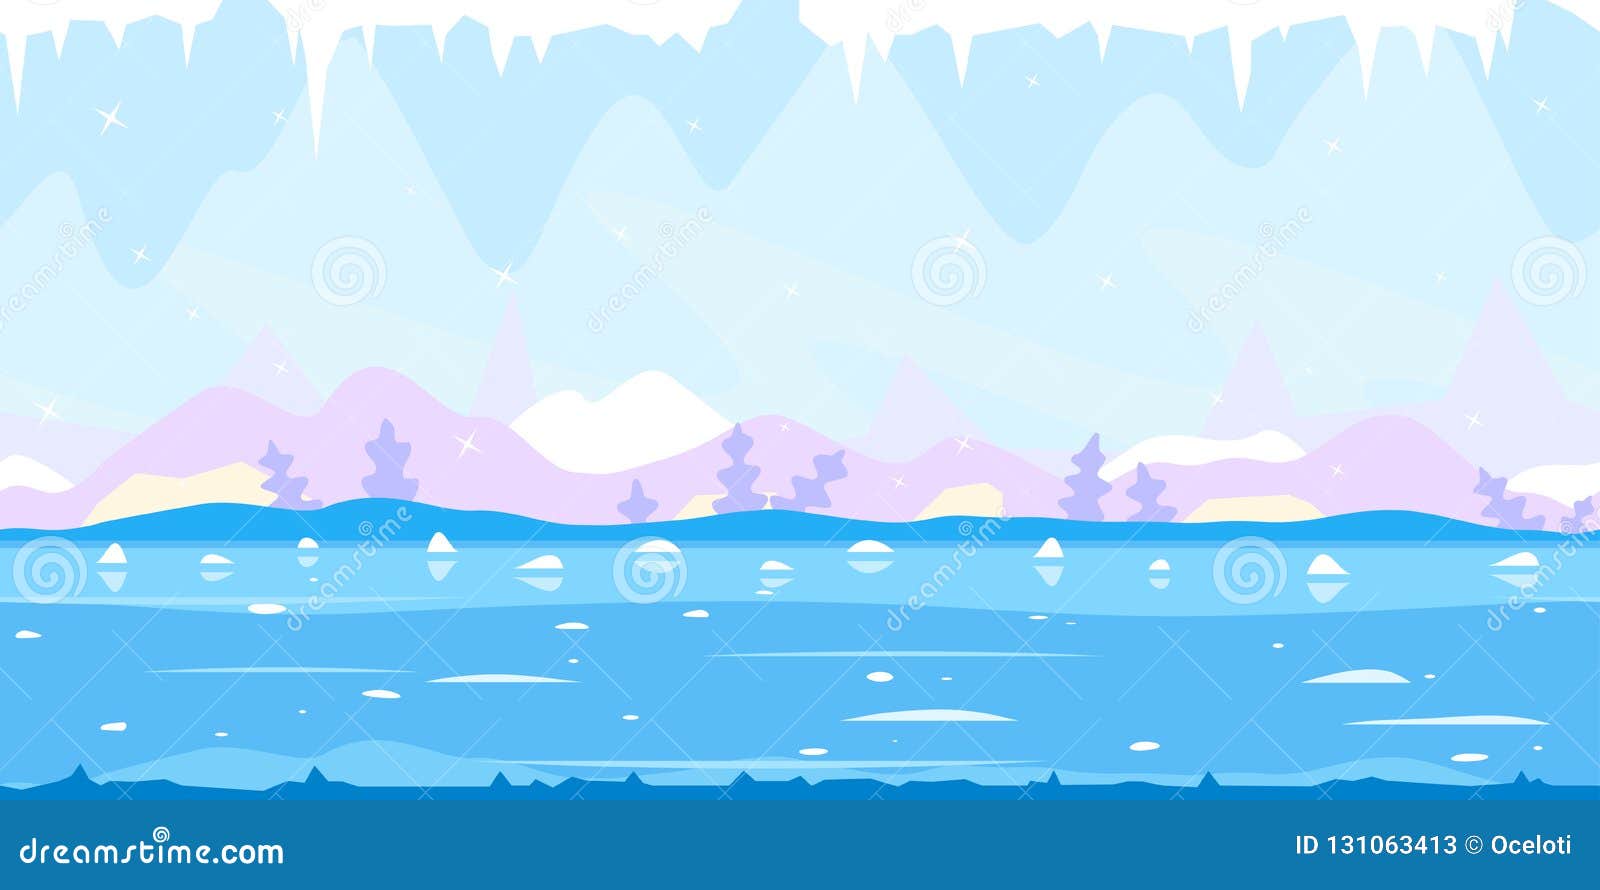 Ice Cave Game Background Flat Landscape Stock Vector Illustration Of Icicles Cave 131063413